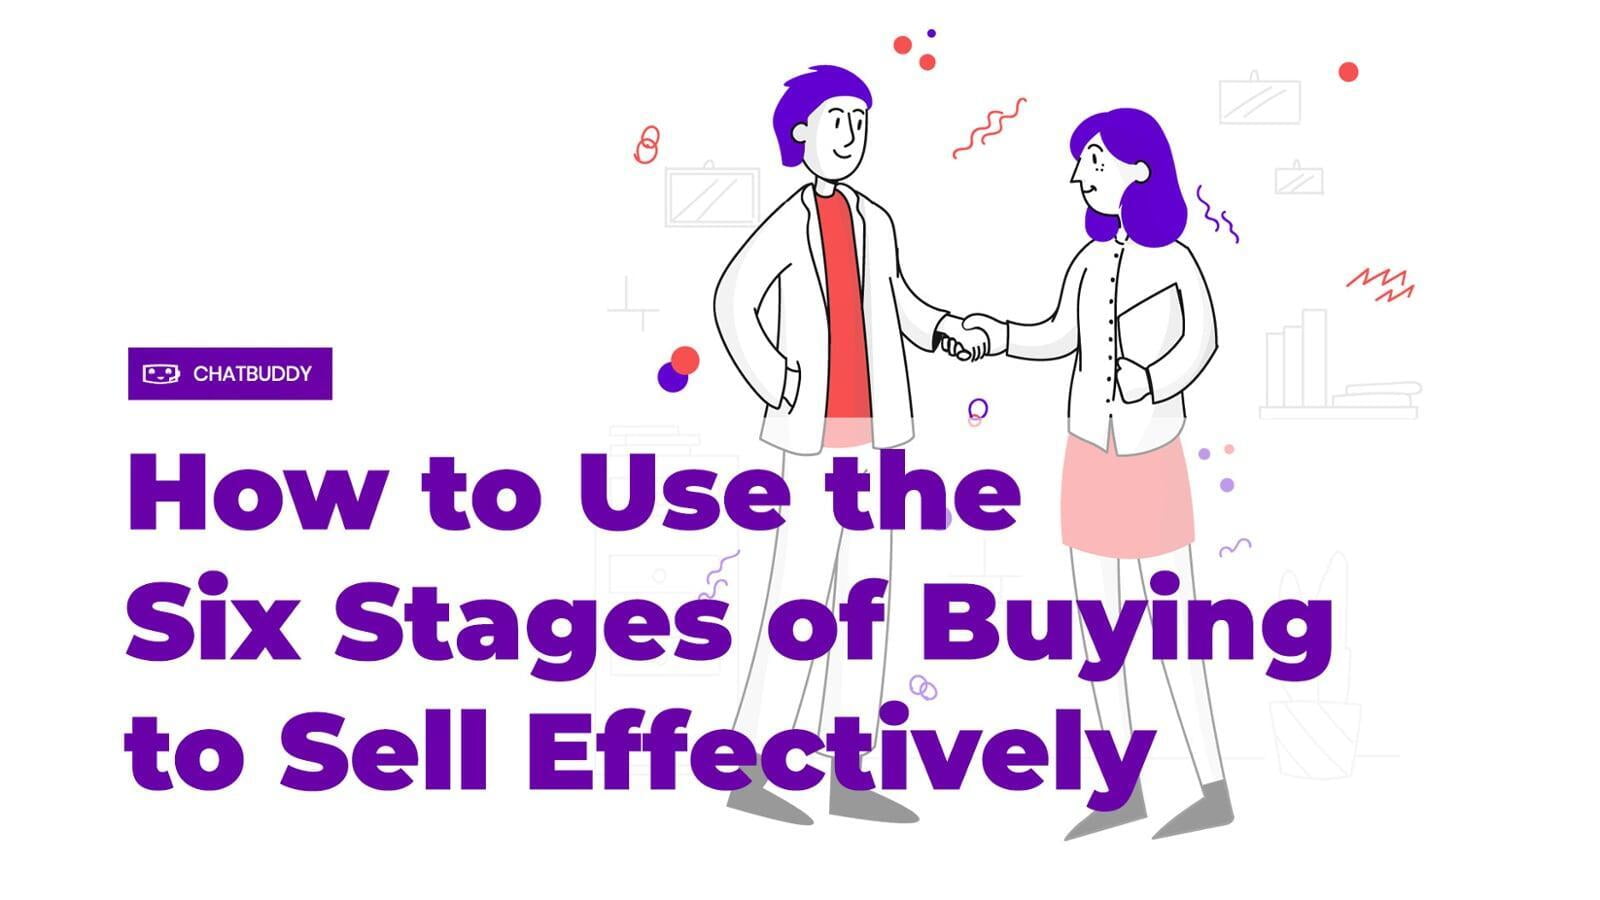 How to Use the Six Stages of Buying to Sell Effectively